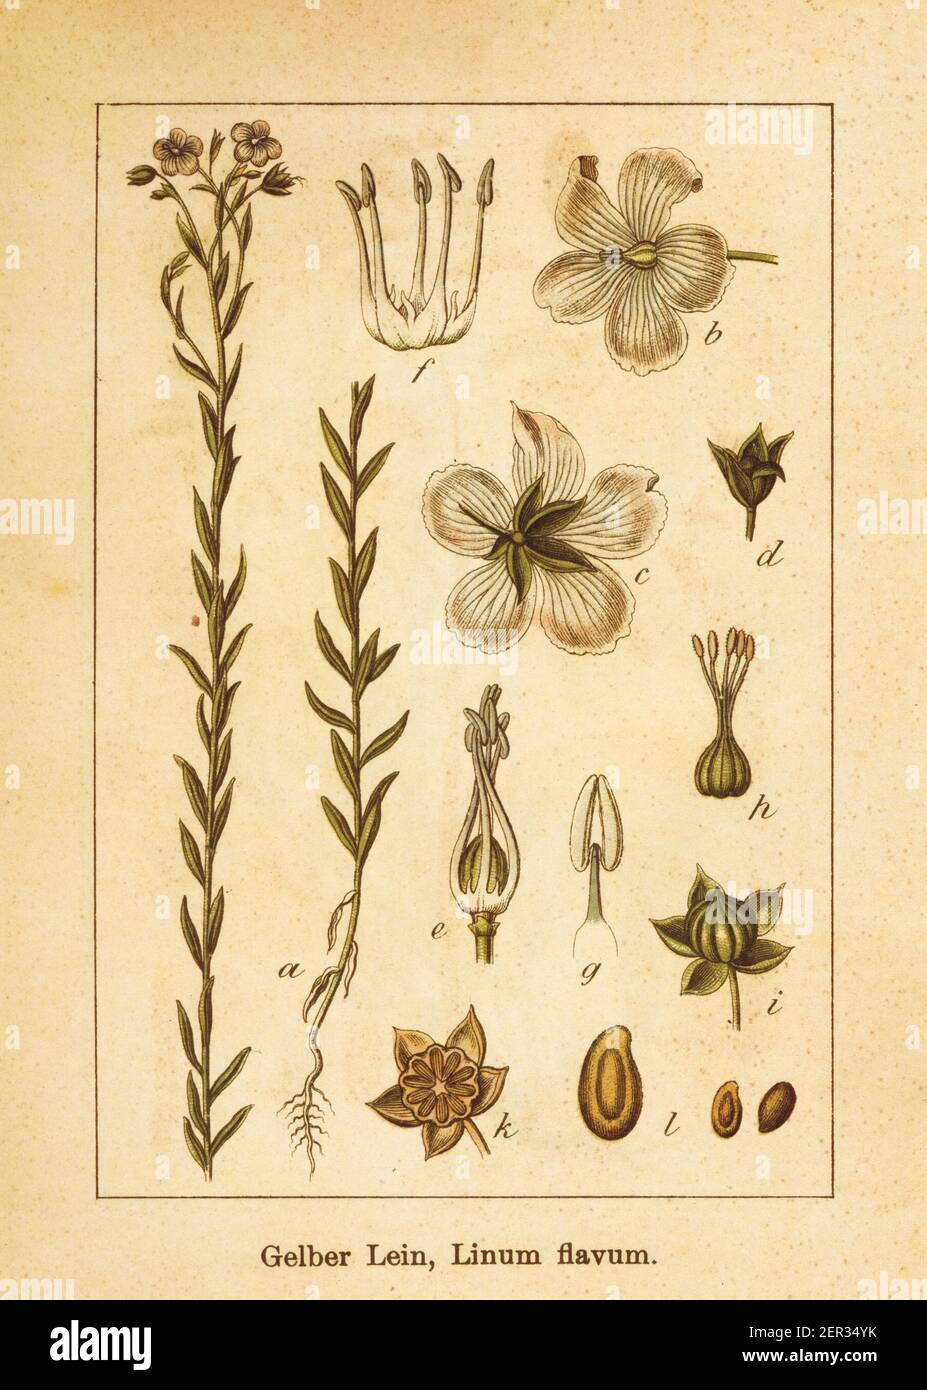 Antique illustration of a linum flavum, also known as golden flax. Engraved by Jacob Sturm (1771-1848) and published in the book Deutschlands Flora in Stock Photo